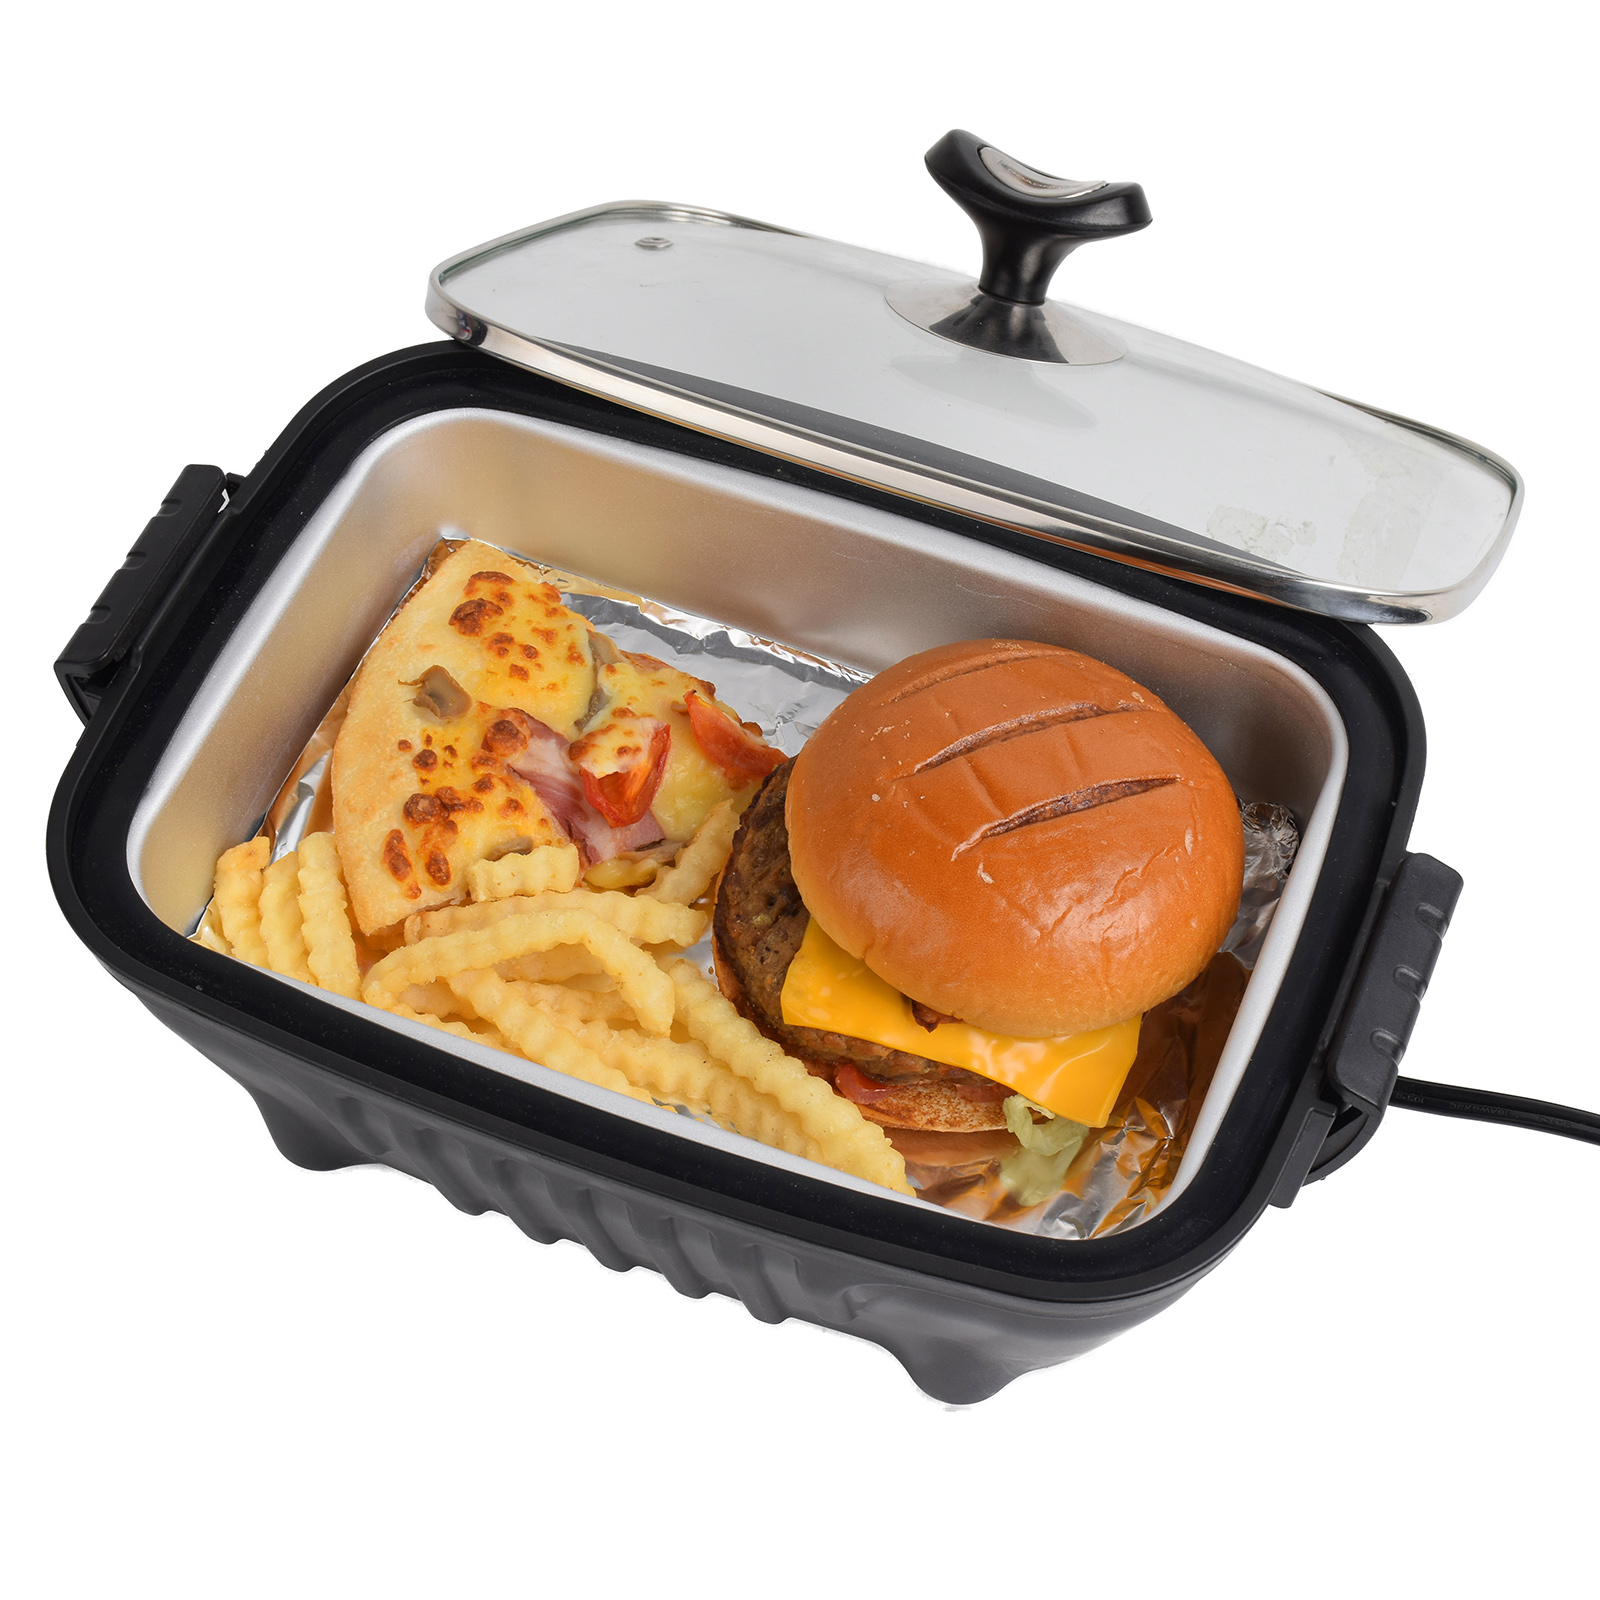 12v Portable Fast Heating Sandwich Maker Mini Toaster And